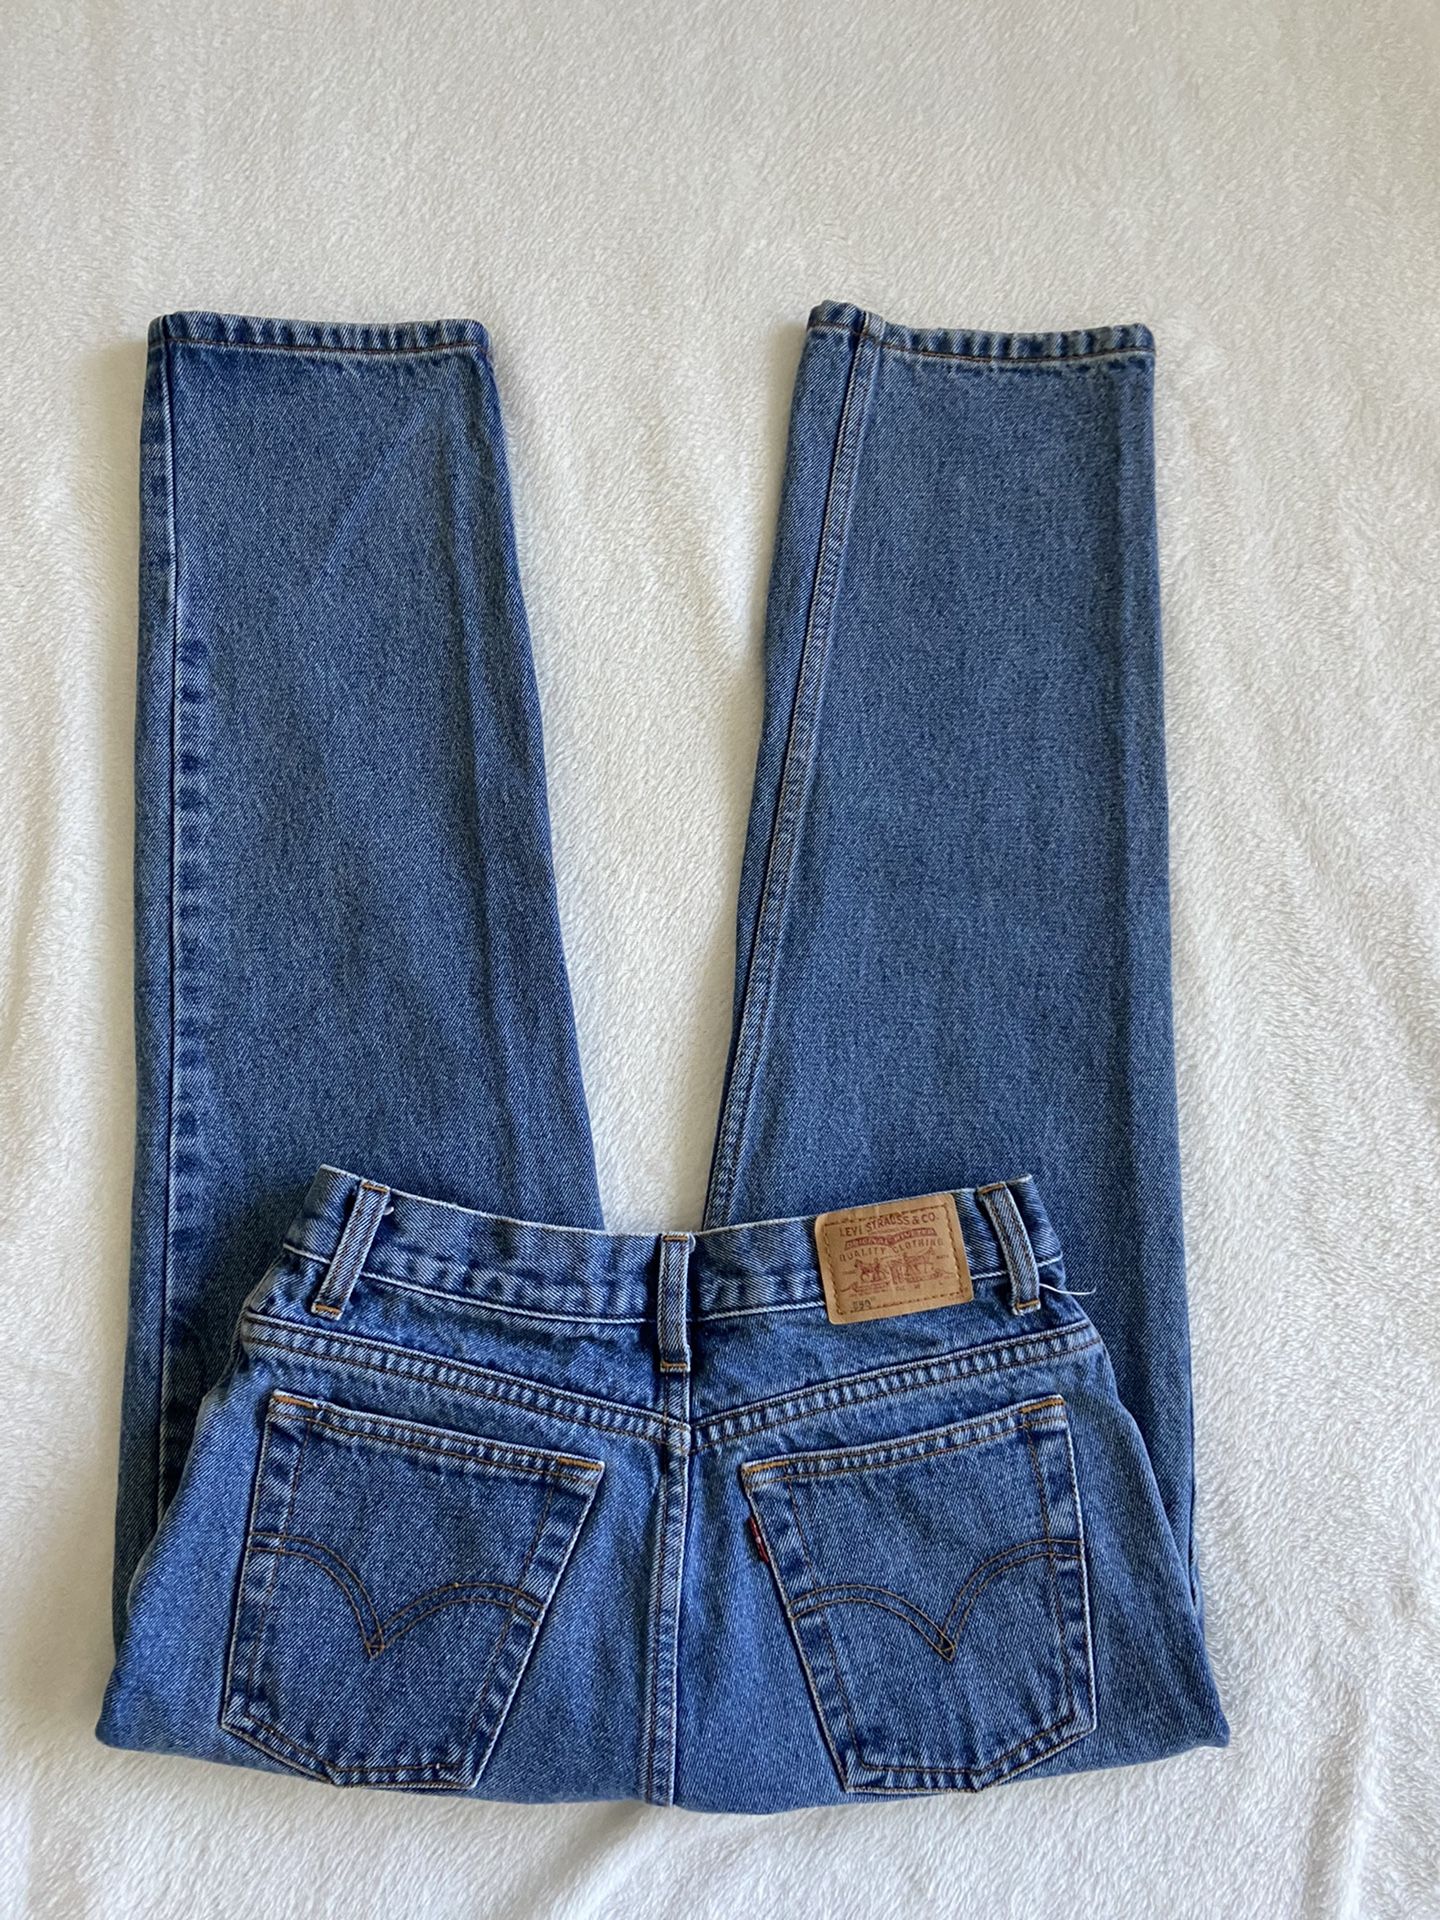 Boy's Levi Jeans for Sale in San Diego, CA - OfferUp